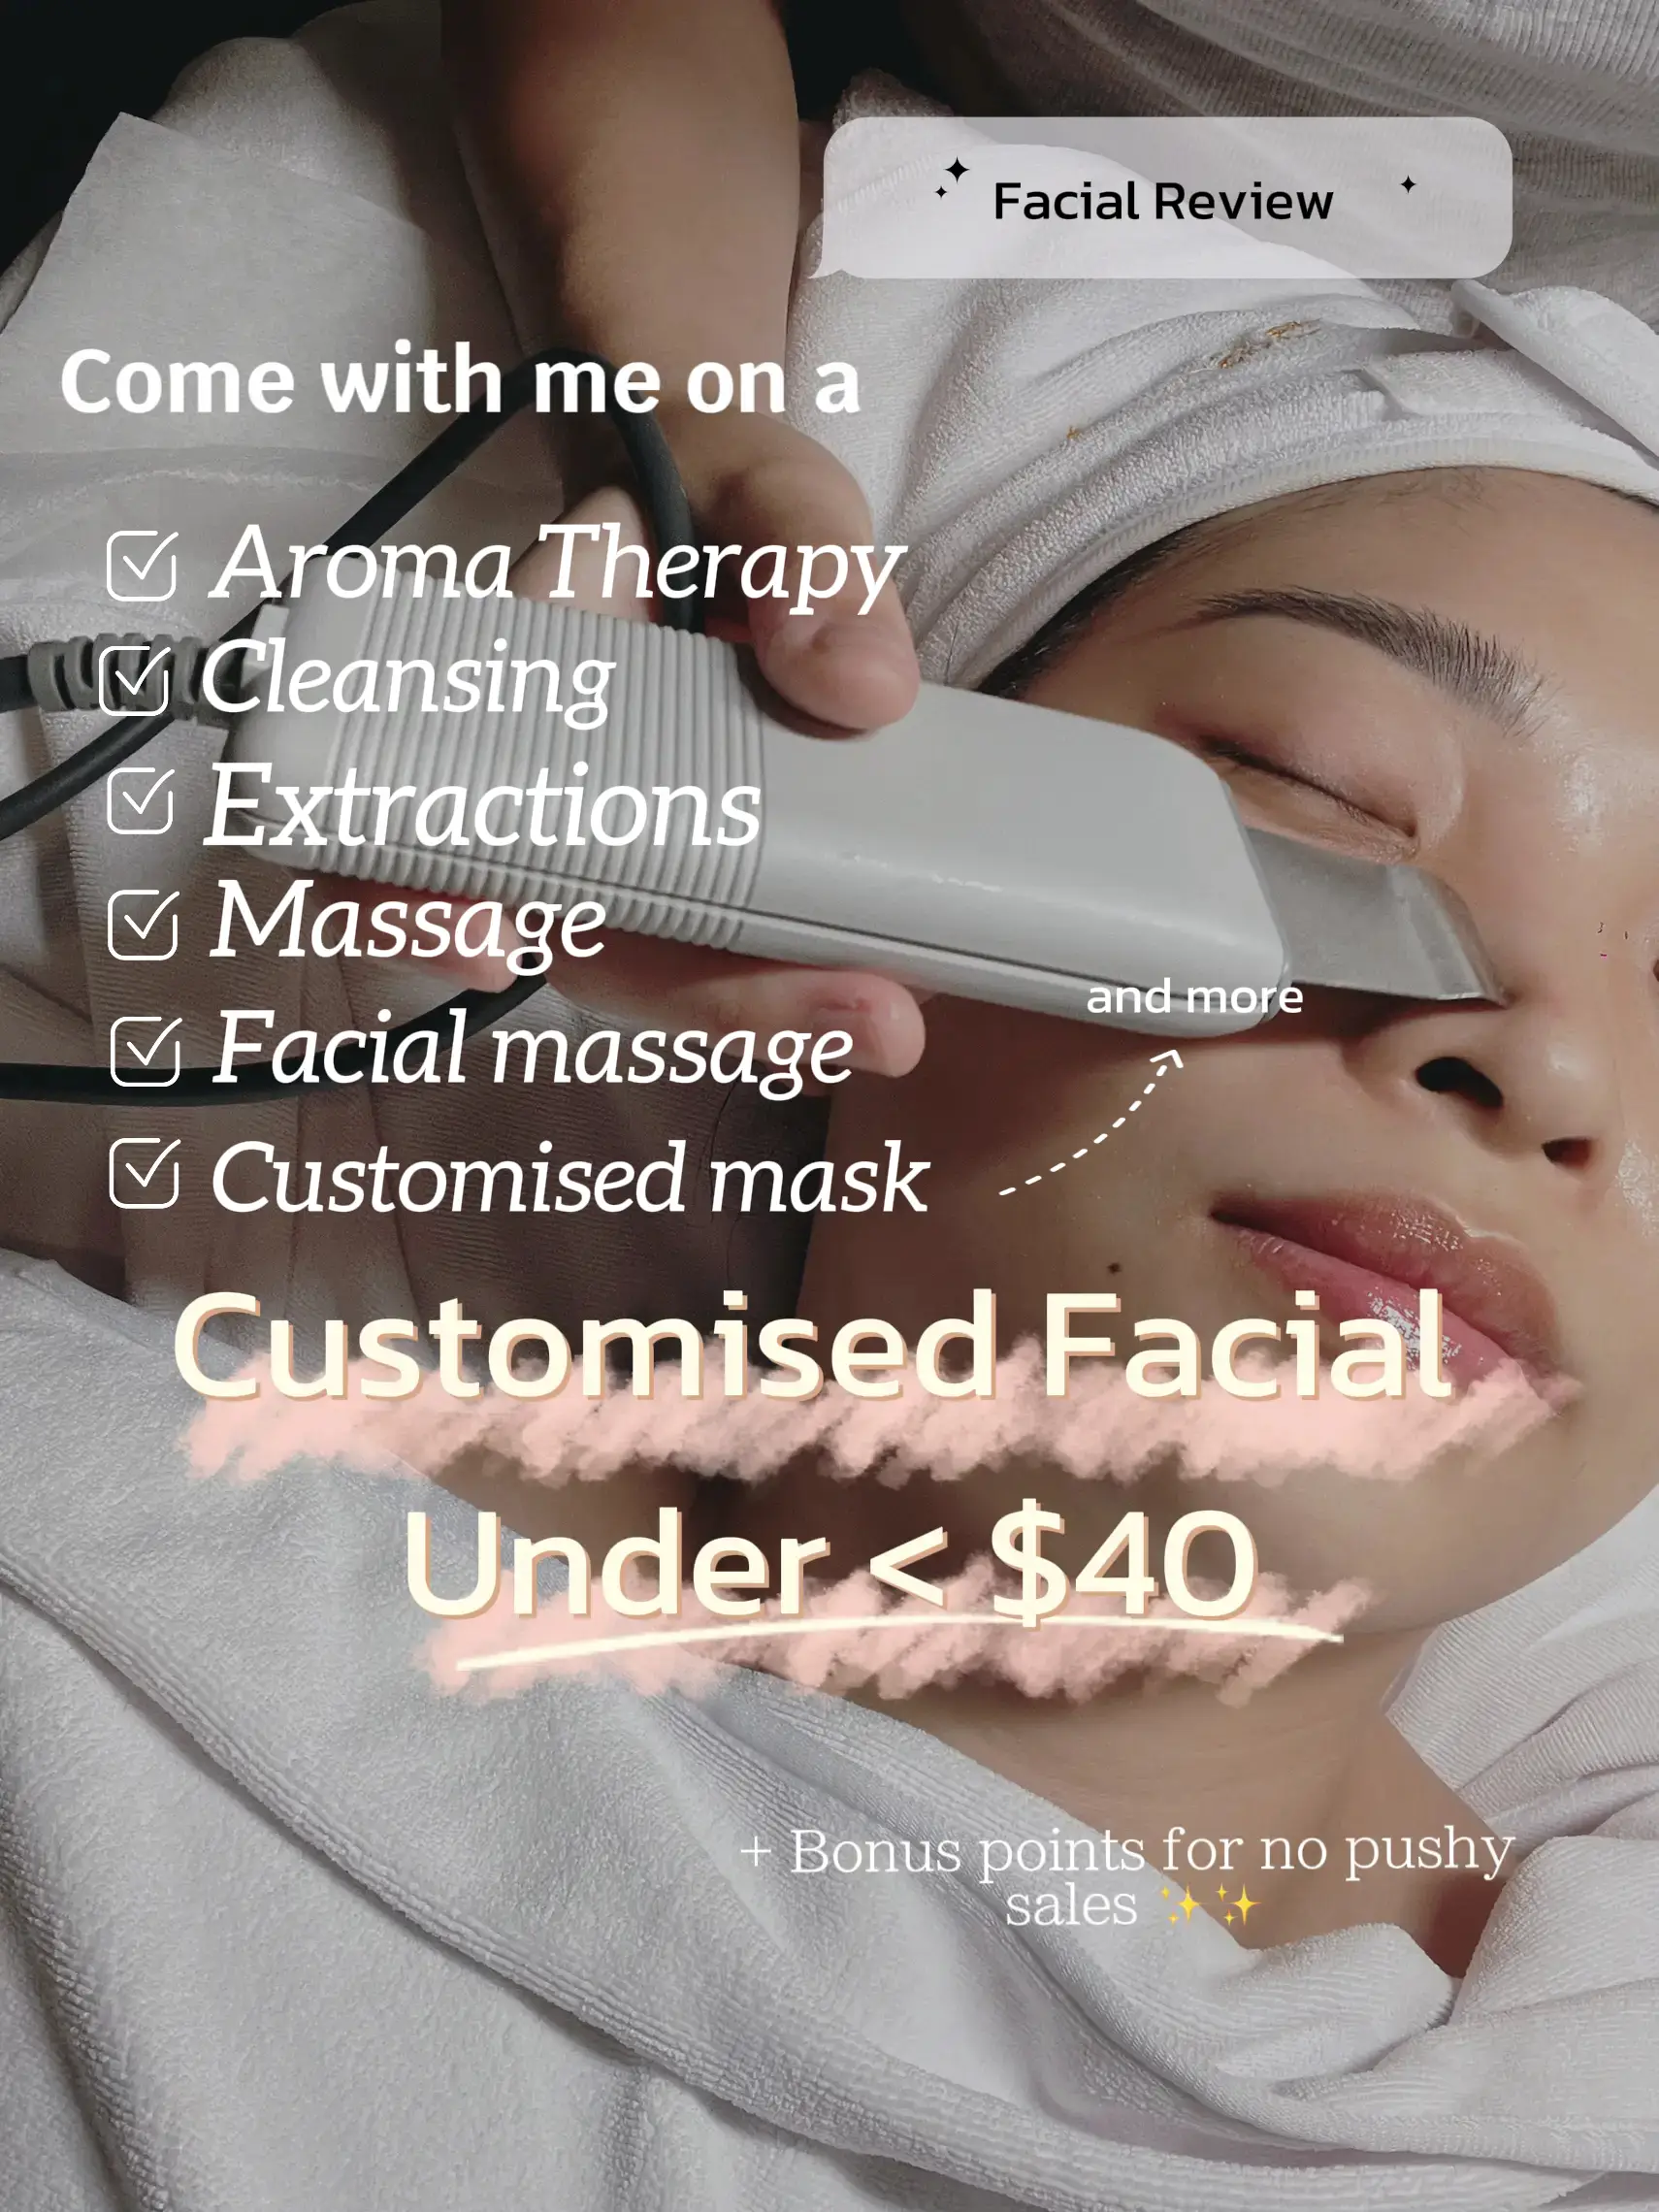 Facial for only $38 at CBD area !!'s images(0)